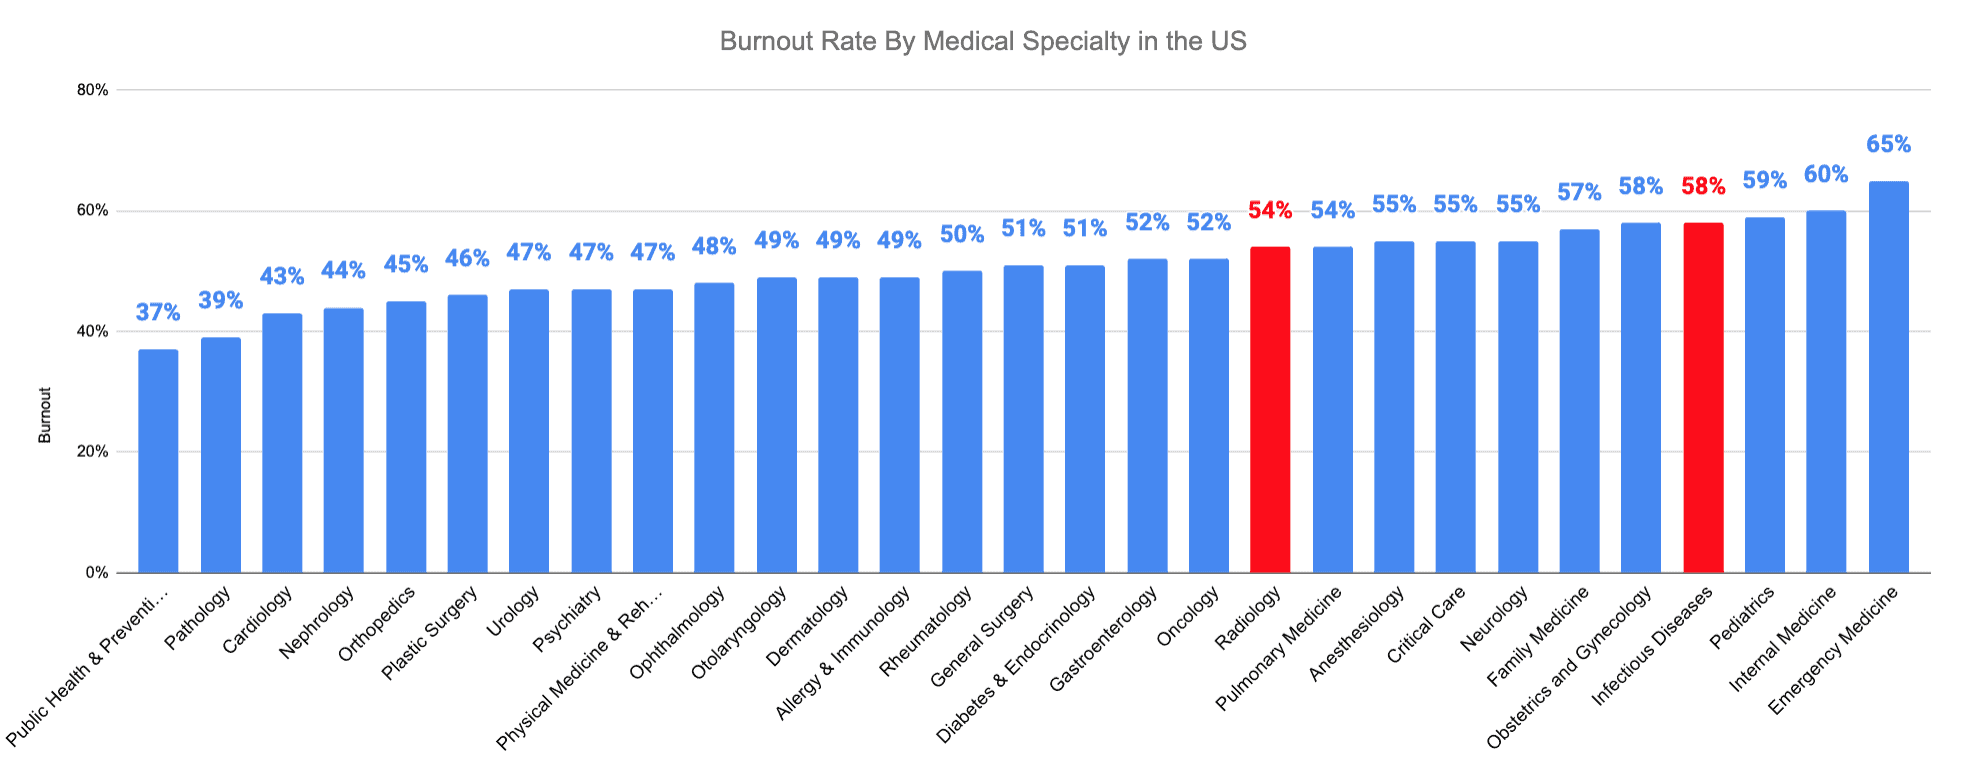 Radiology vs. Infectious Disease Burnout Rate By Medical Specialty in the US